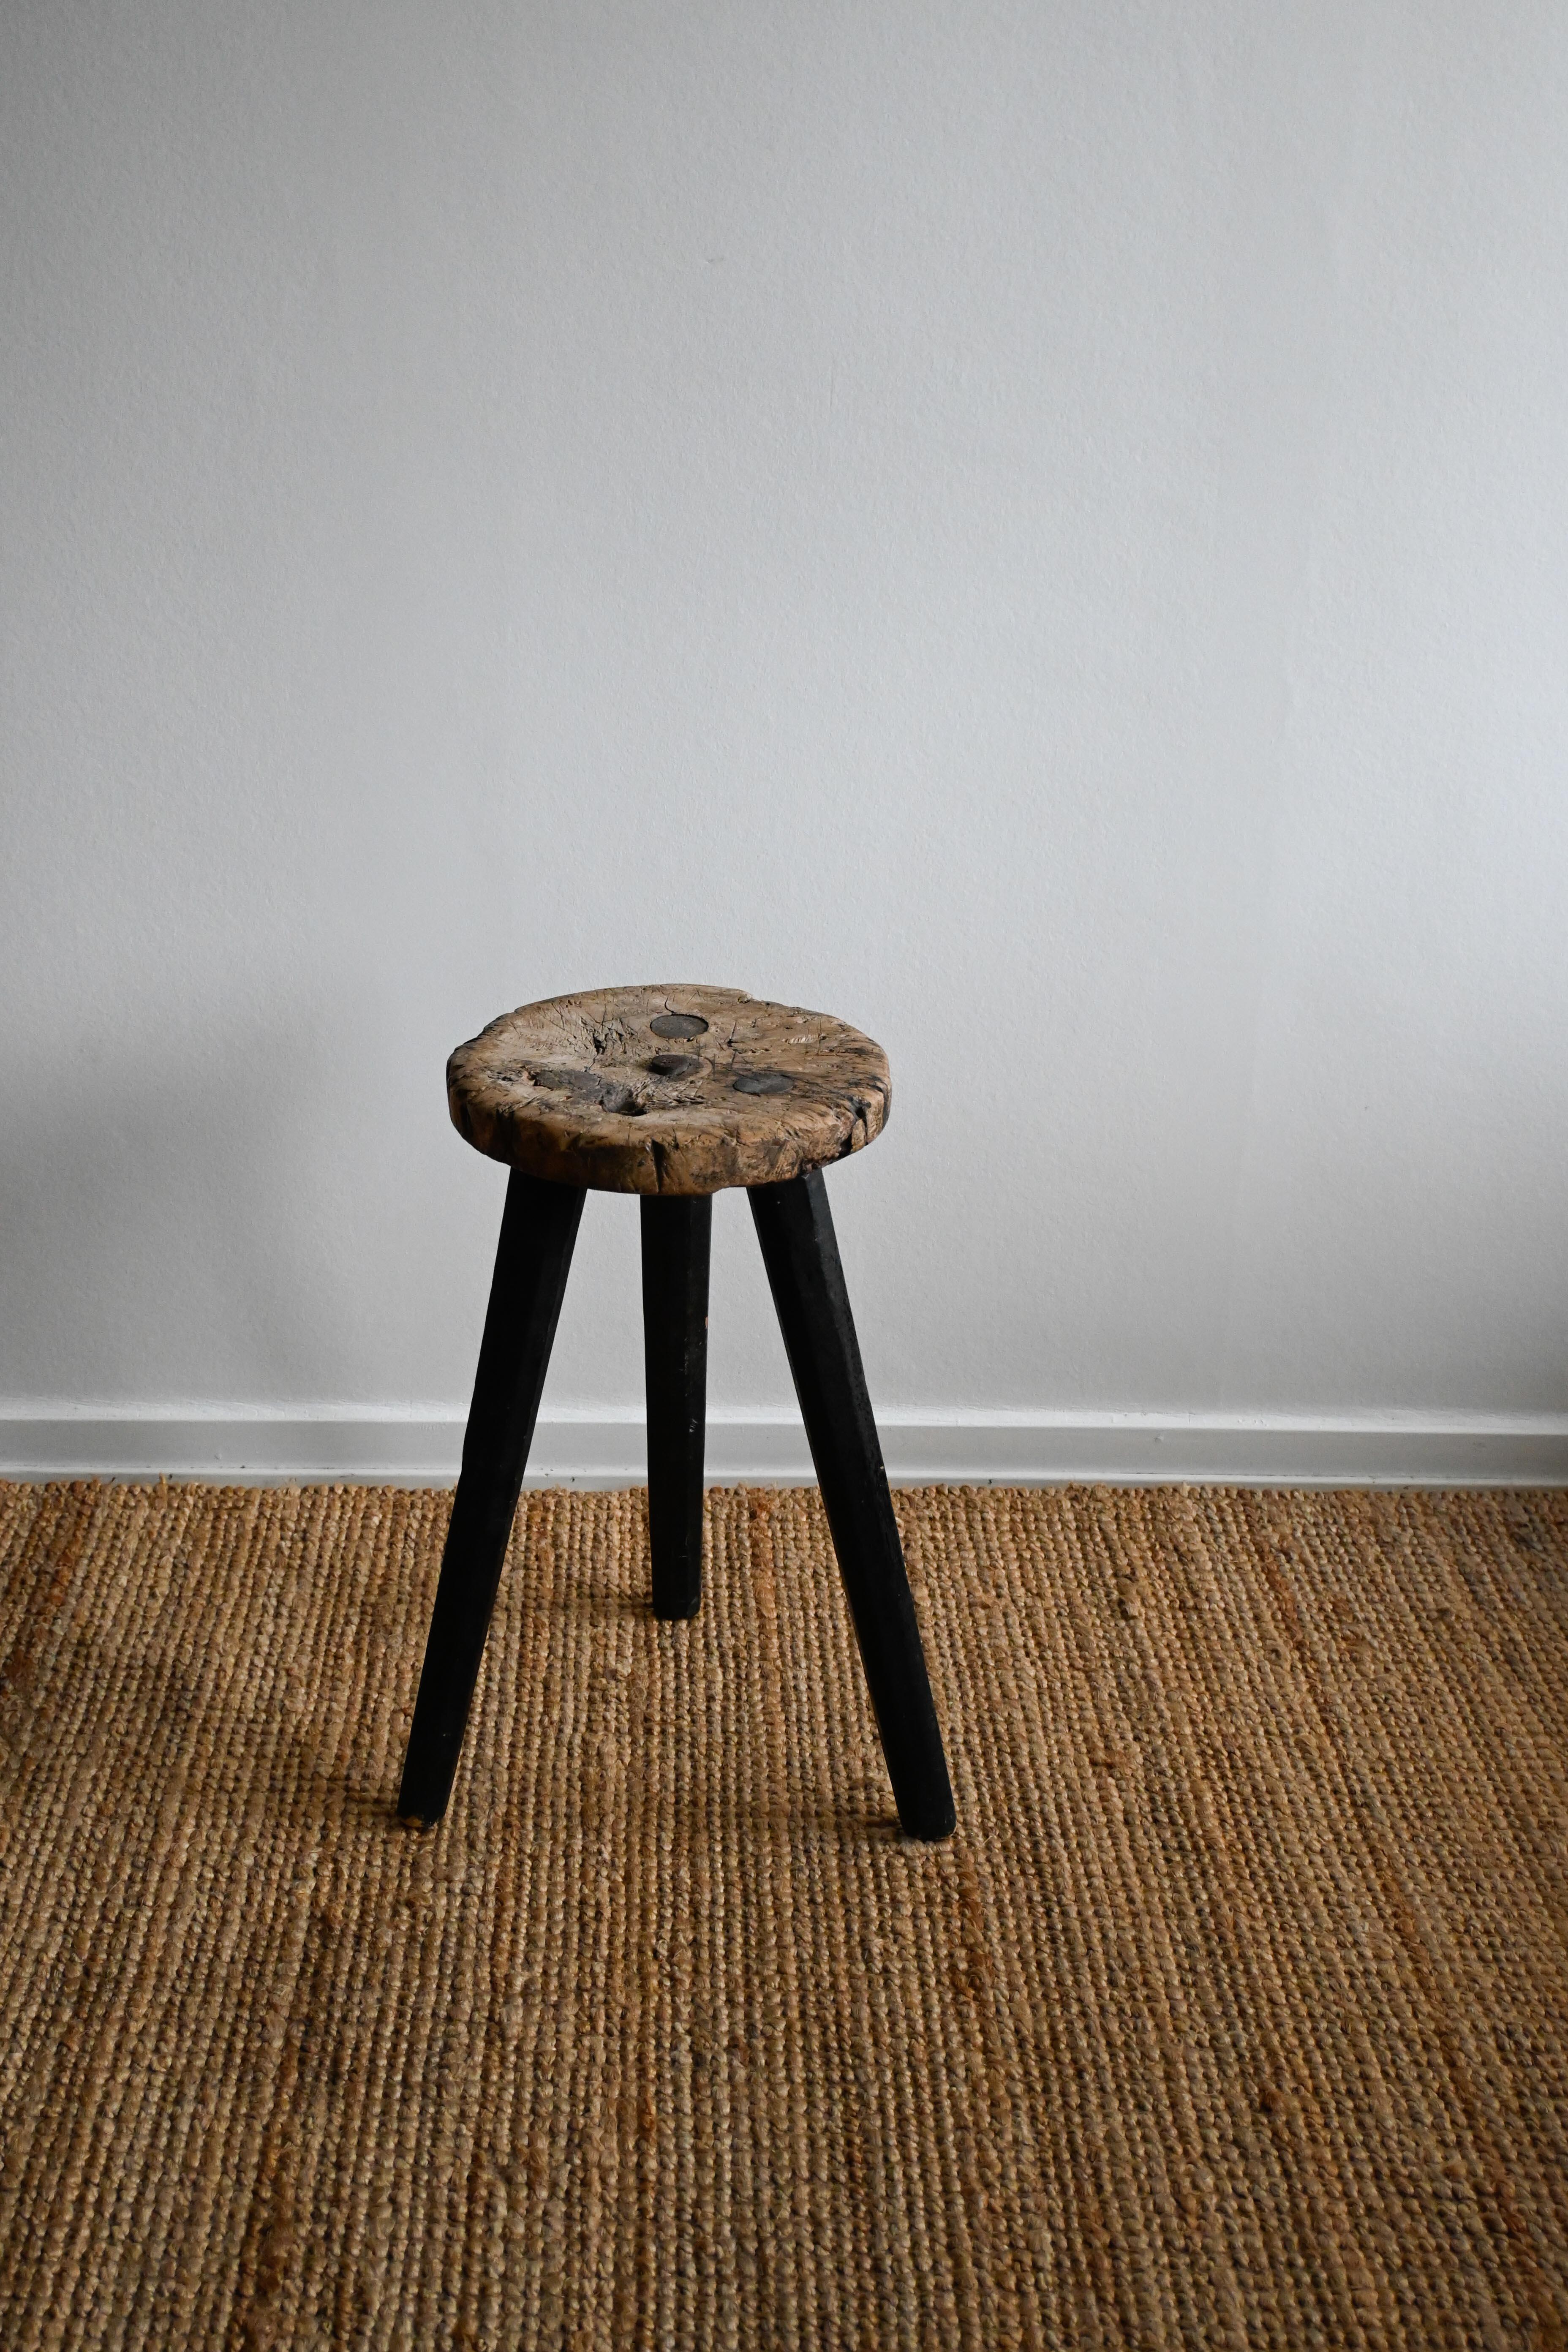 Late 18th Century Three-legged Stool from 1798 from Northen Sweden For Sale